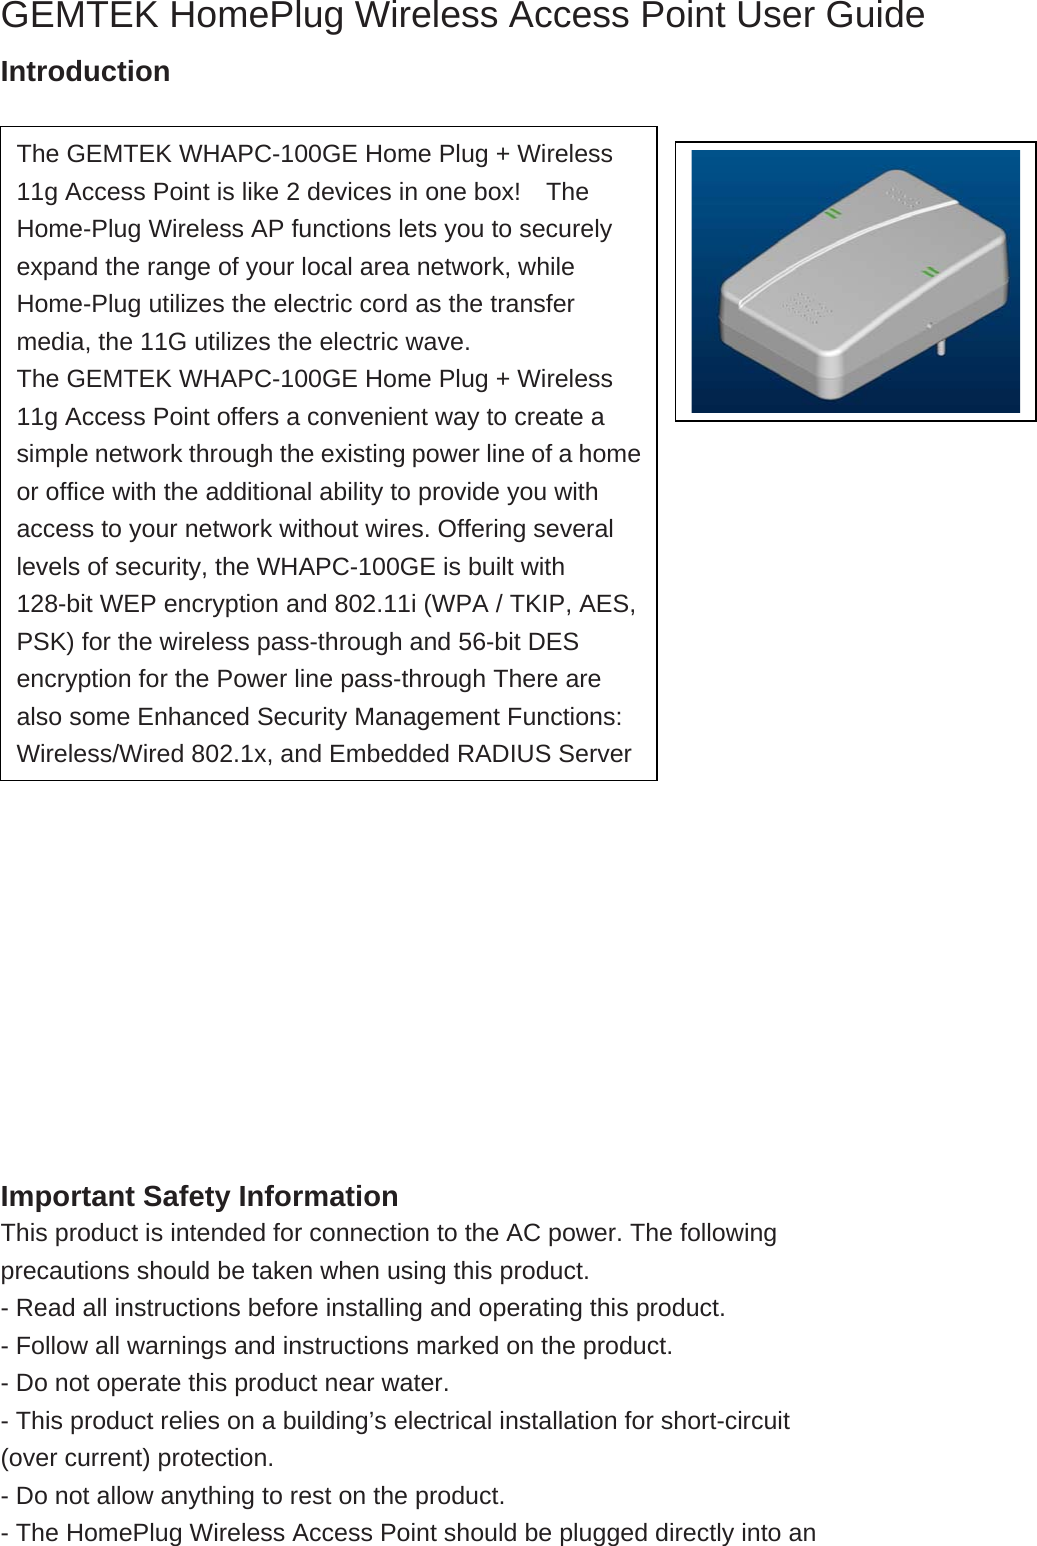  GEMTEK HomePlug Wireless Access Point User Guide Introduction                              Important Safety Information This product is intended for connection to the AC power. The following precautions should be taken when using this product. - Read all instructions before installing and operating this product. - Follow all warnings and instructions marked on the product. - Do not operate this product near water. - This product relies on a building’s electrical installation for short-circuit (over current) protection. - Do not allow anything to rest on the product. - The HomePlug Wireless Access Point should be plugged directly into an The GEMTEK WHAPC-100GE Home Plug + Wireless 11g Access Point is like 2 devices in one box!    The Home-Plug Wireless AP functions lets you to securely expand the range of your local area network, while Home-Plug utilizes the electric cord as the transfer media, the 11G utilizes the electric wave. The GEMTEK WHAPC-100GE Home Plug + Wireless 11g Access Point offers a convenient way to create a simple network through the existing power line of a homeor office with the additional ability to provide you with access to your network without wires. Offering several levels of security, the WHAPC-100GE is built with 128-bit WEP encryption and 802.11i (WPA / TKIP, AES, PSK) for the wireless pass-through and 56-bit DES encryption for the Power line pass-through There are also some Enhanced Security Management Functions: Wireless/Wired 802.1x, and Embedded RADIUS Server 